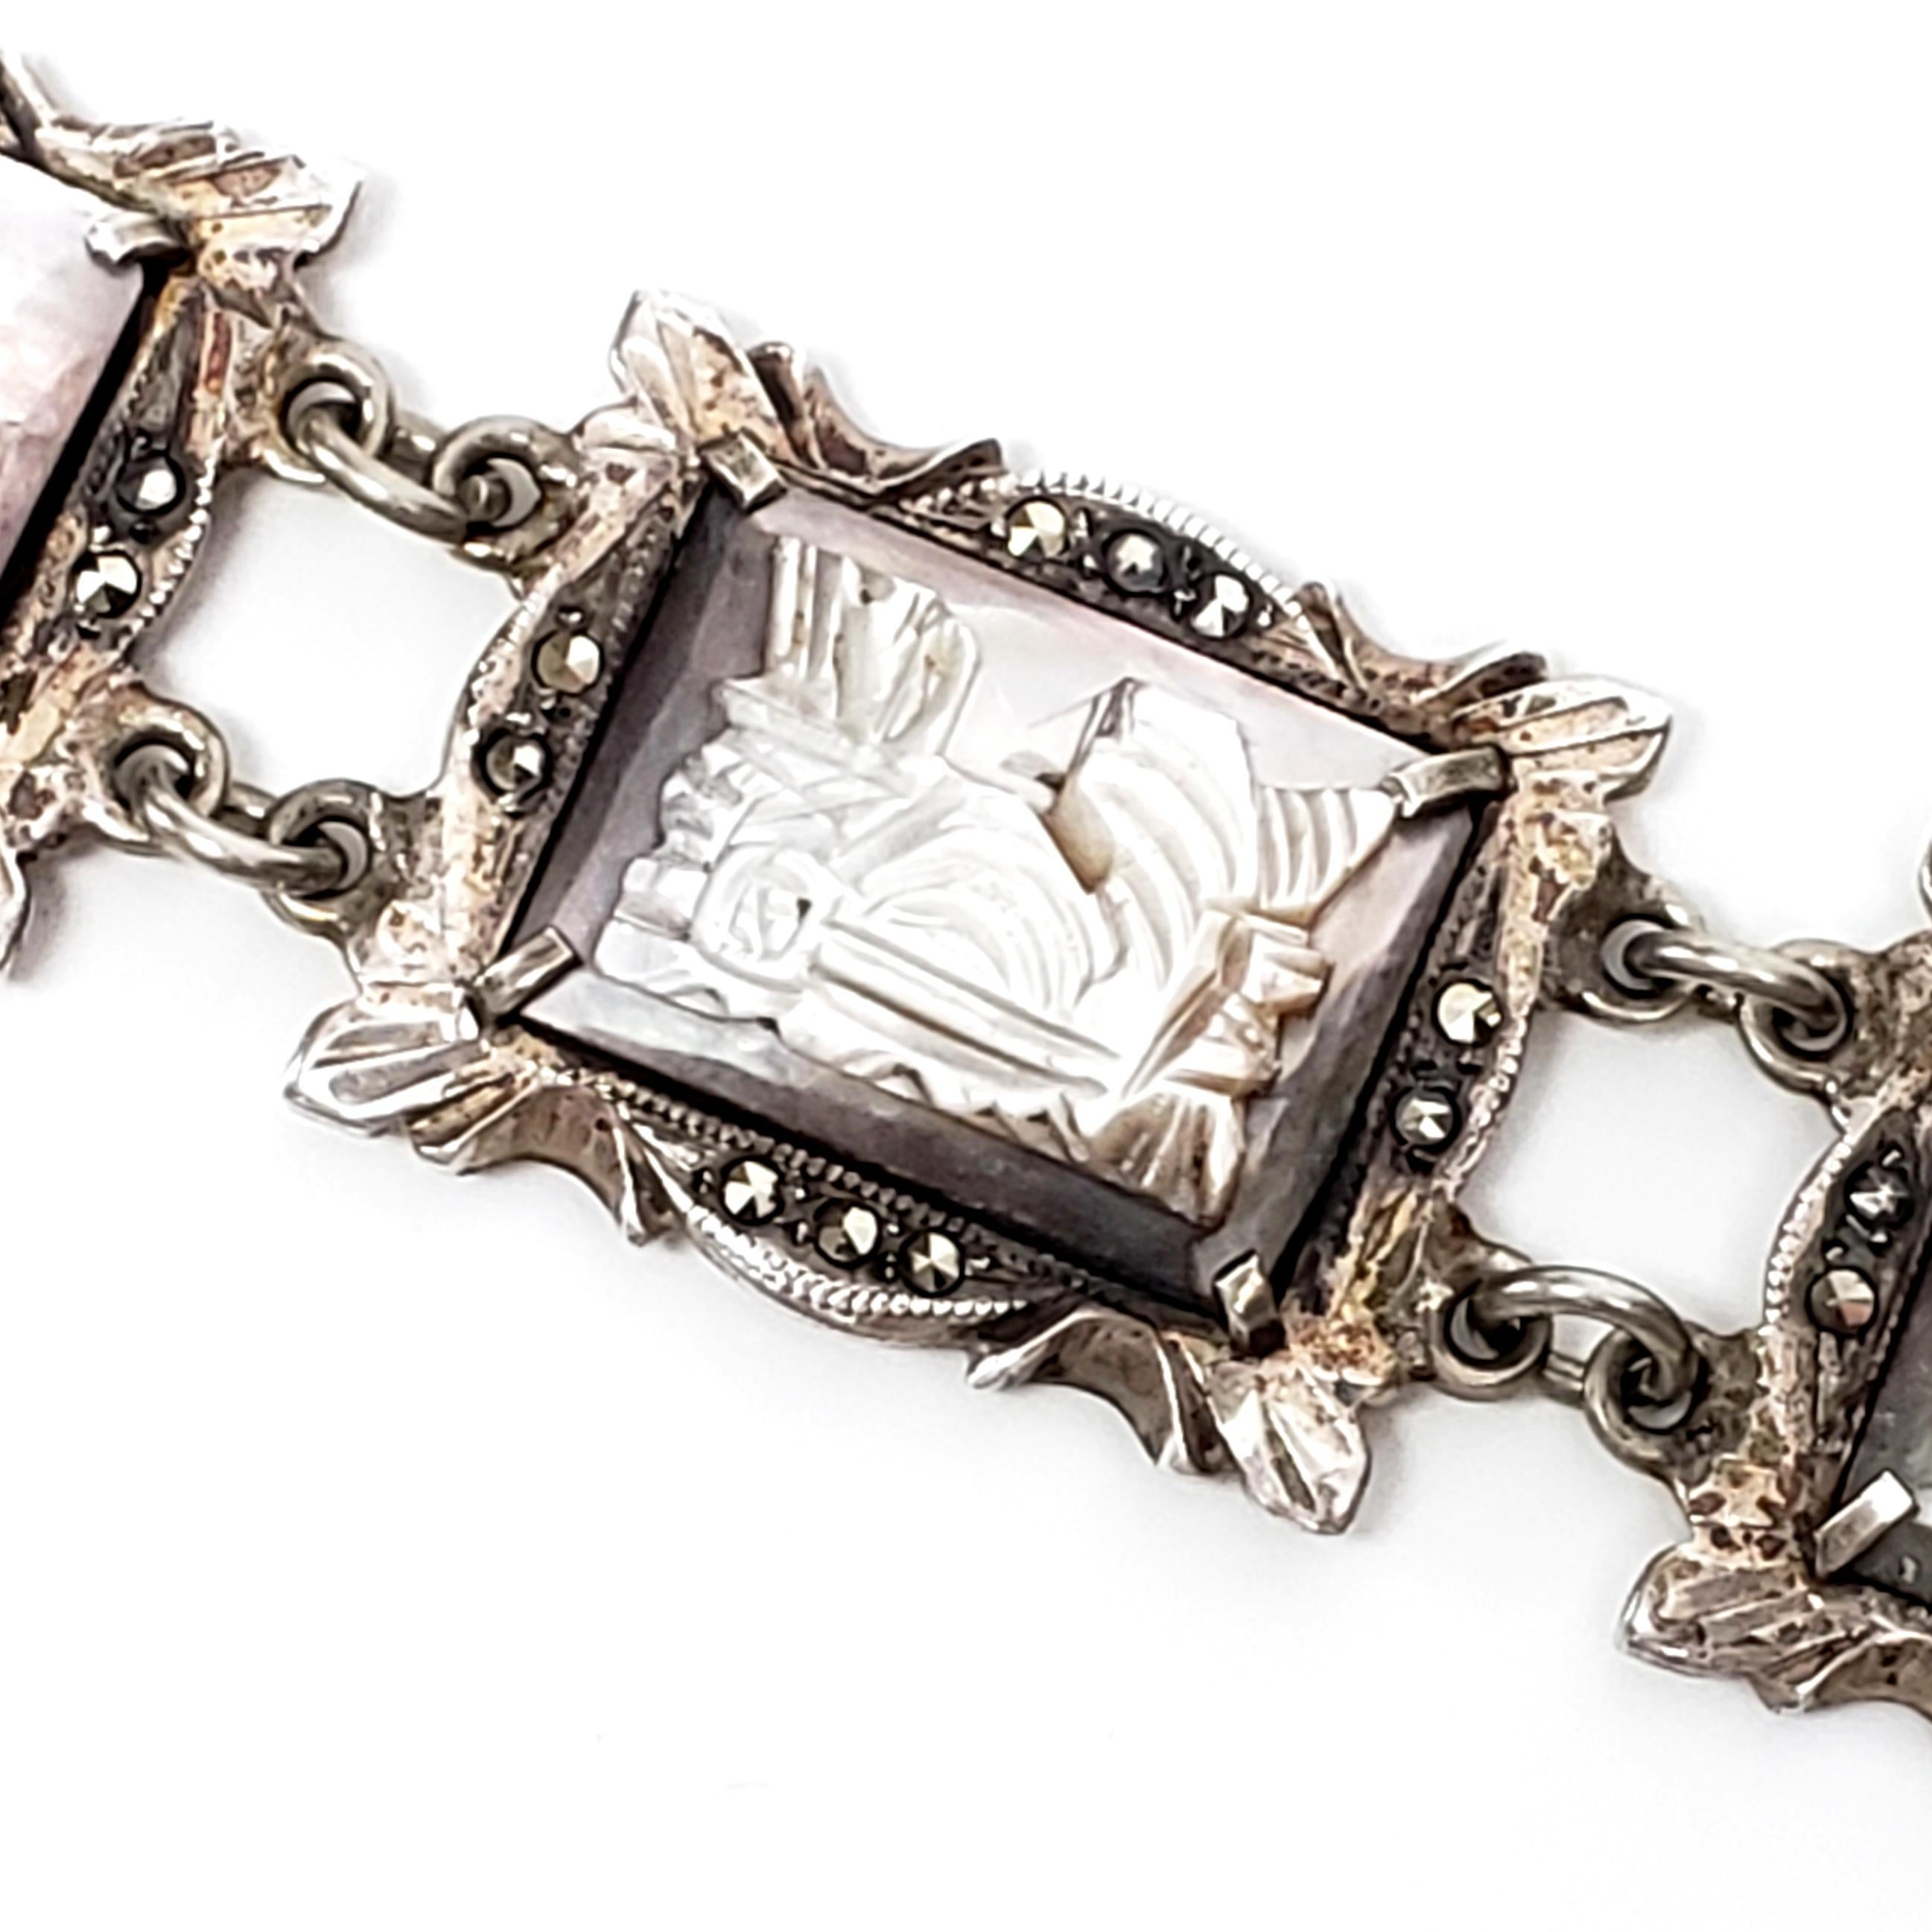 Vintage 800 silver, marcasite and carved abalone bracelet.

Abalone stones are carved into classic Roman chariot scenes, prong set on ornate silver frame links adorned with marcasite. Hidden slide closure.

Measures approx 7 3/4